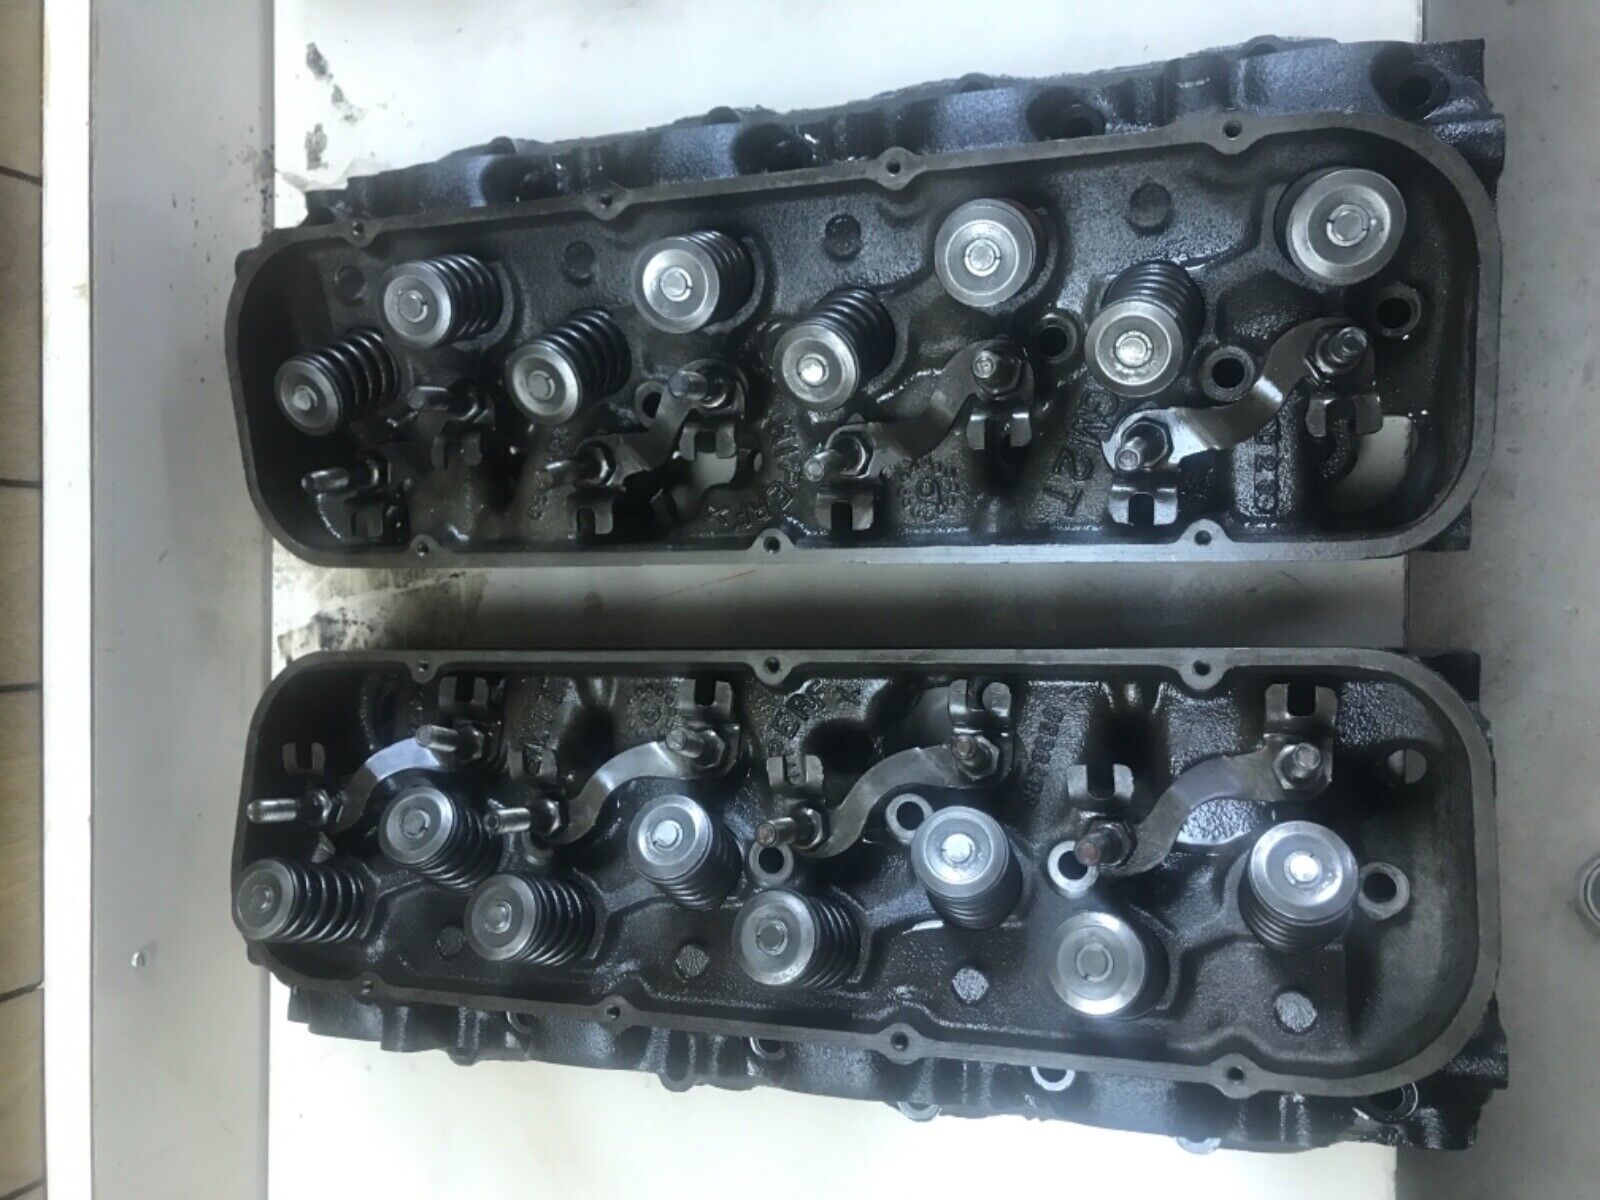 1966 Early CORVETTE 3873858 CYLINDER HEADS DATED: D 2 6 / B 25 6 427 